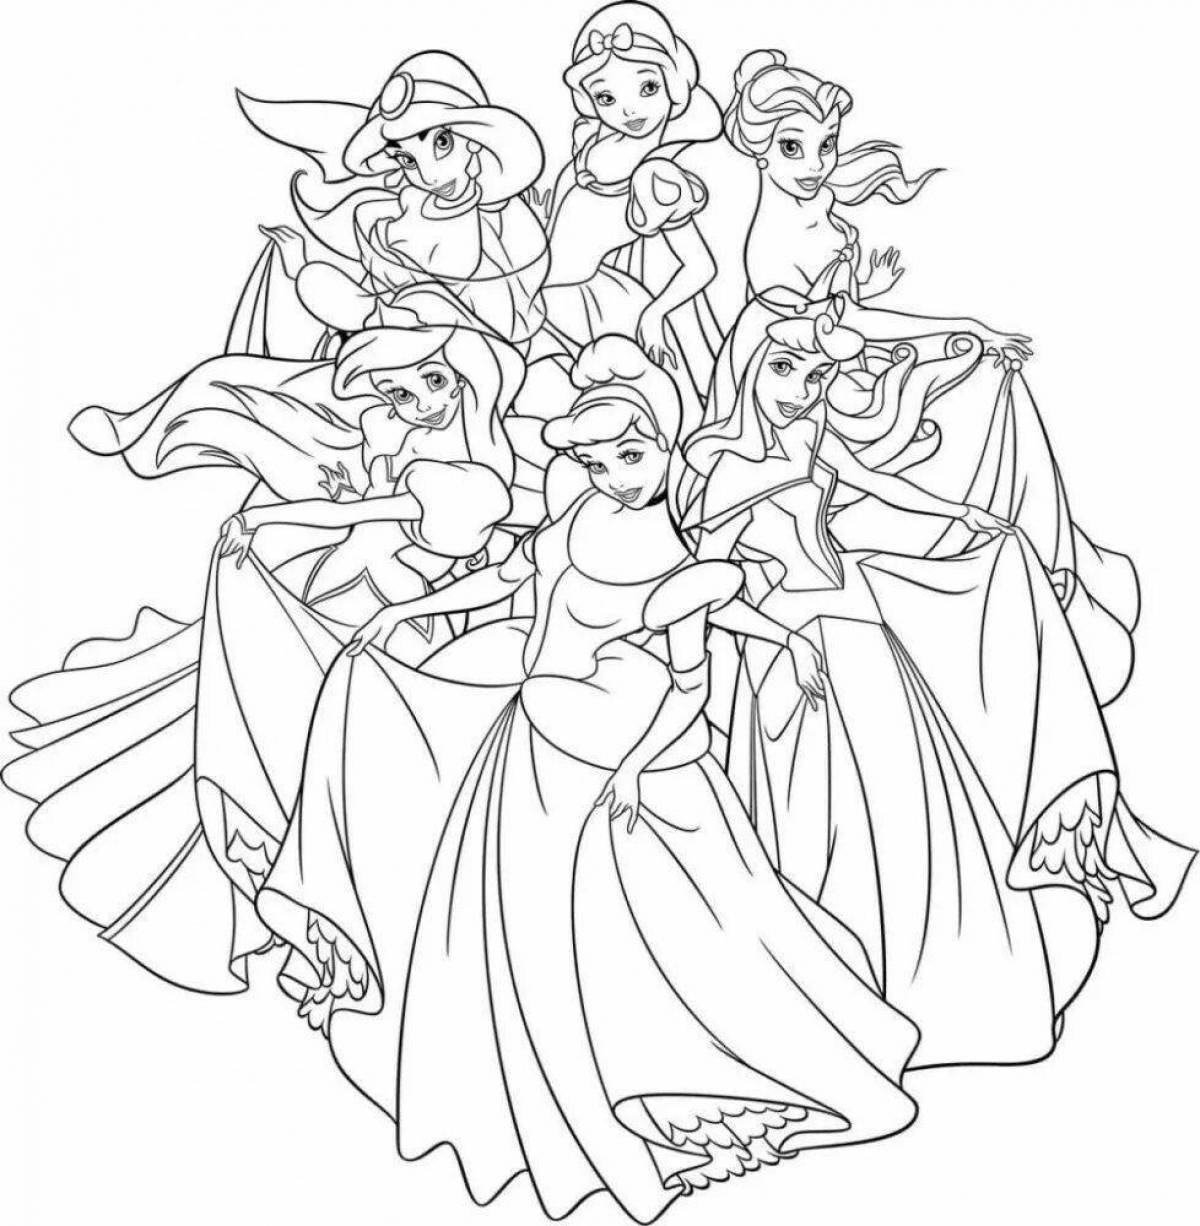 Disney princess games majestic coloring pages